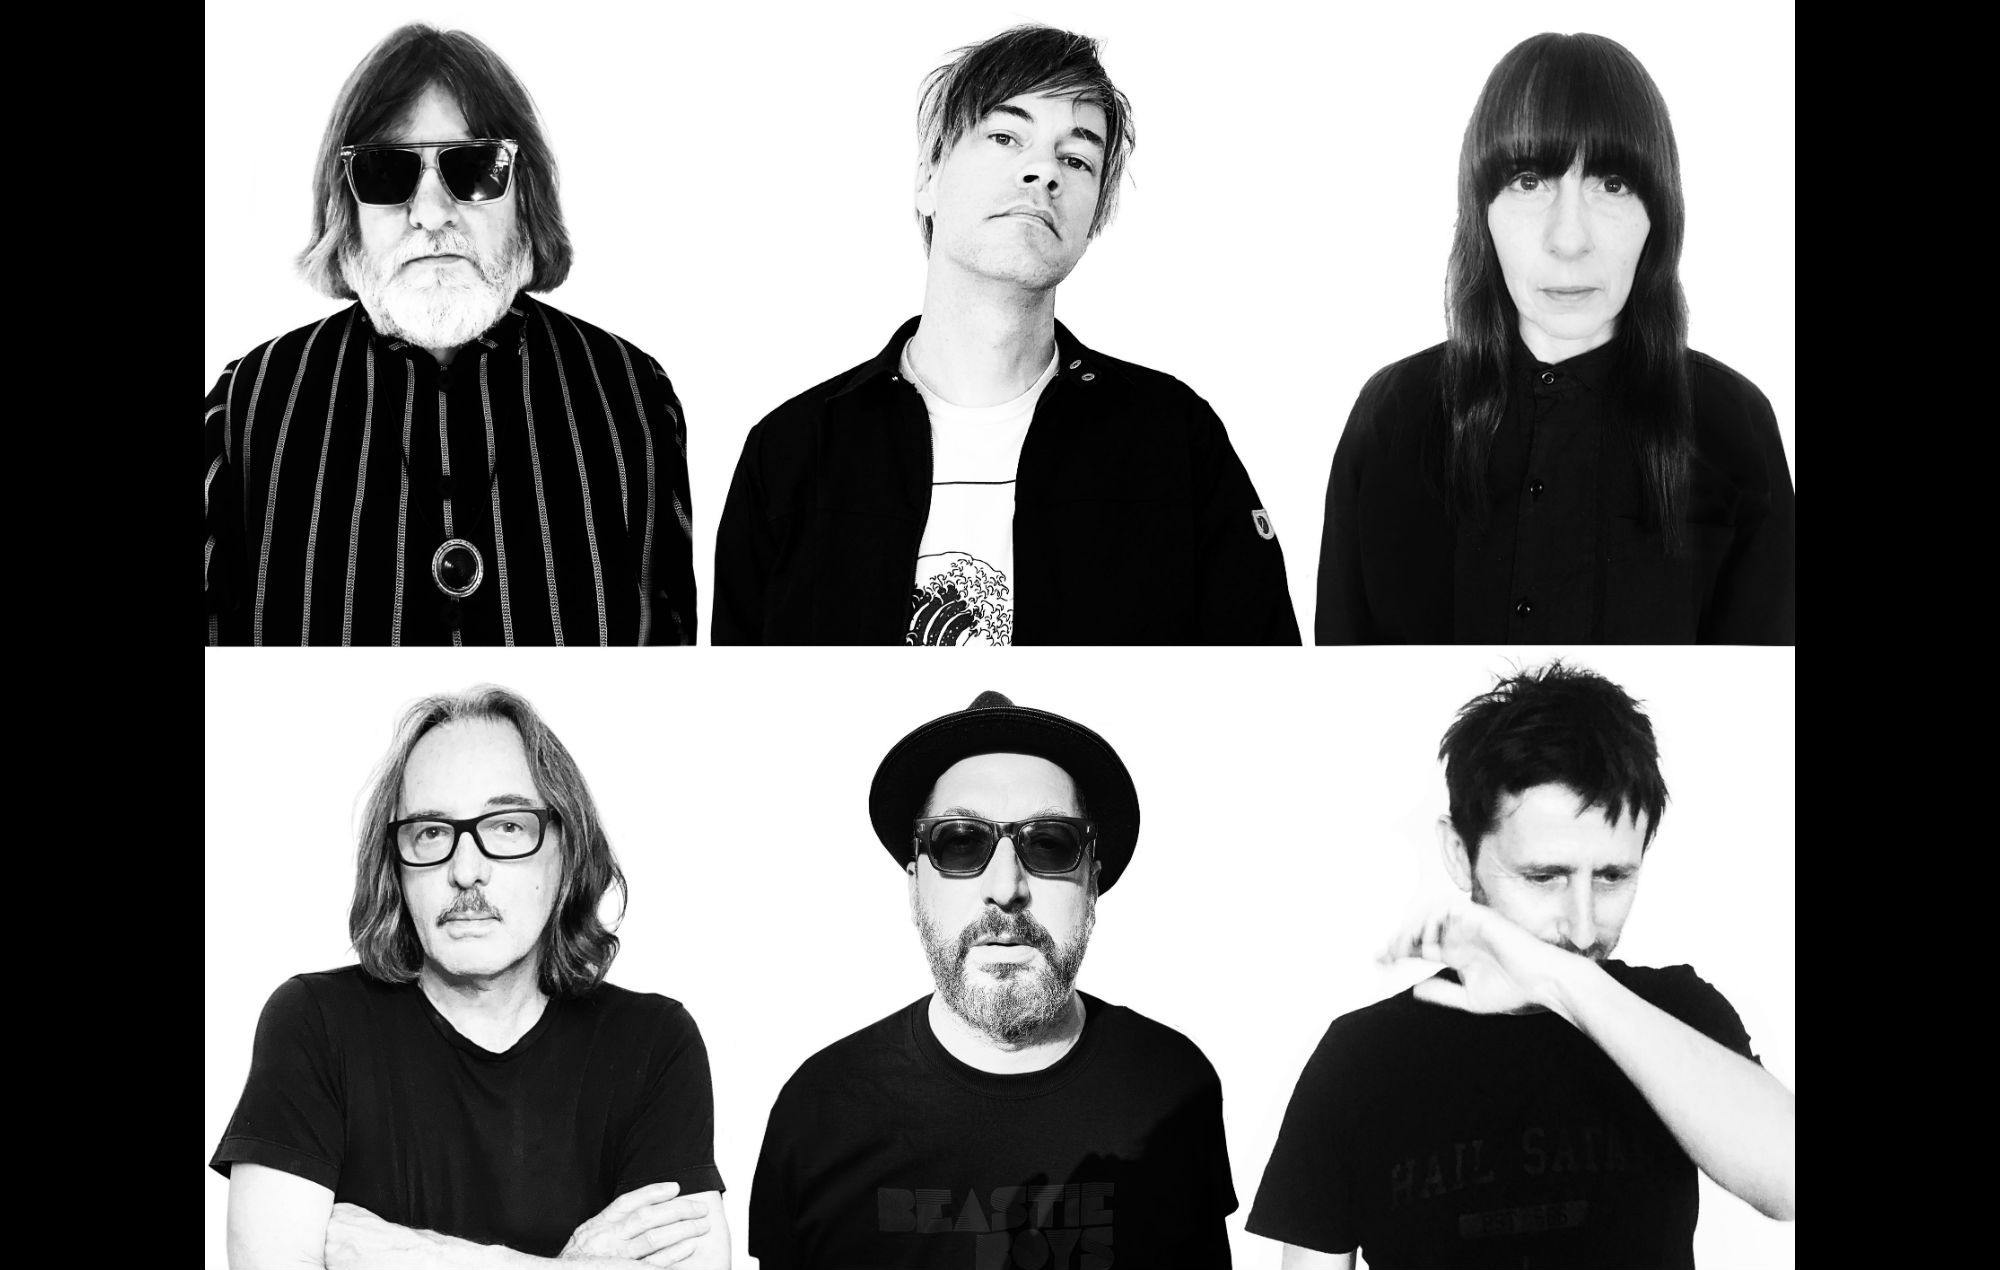 Butch Vig returns with new 5 Billion In Diamonds album – and tells us about Garbage’s “dark, eclectic new record”